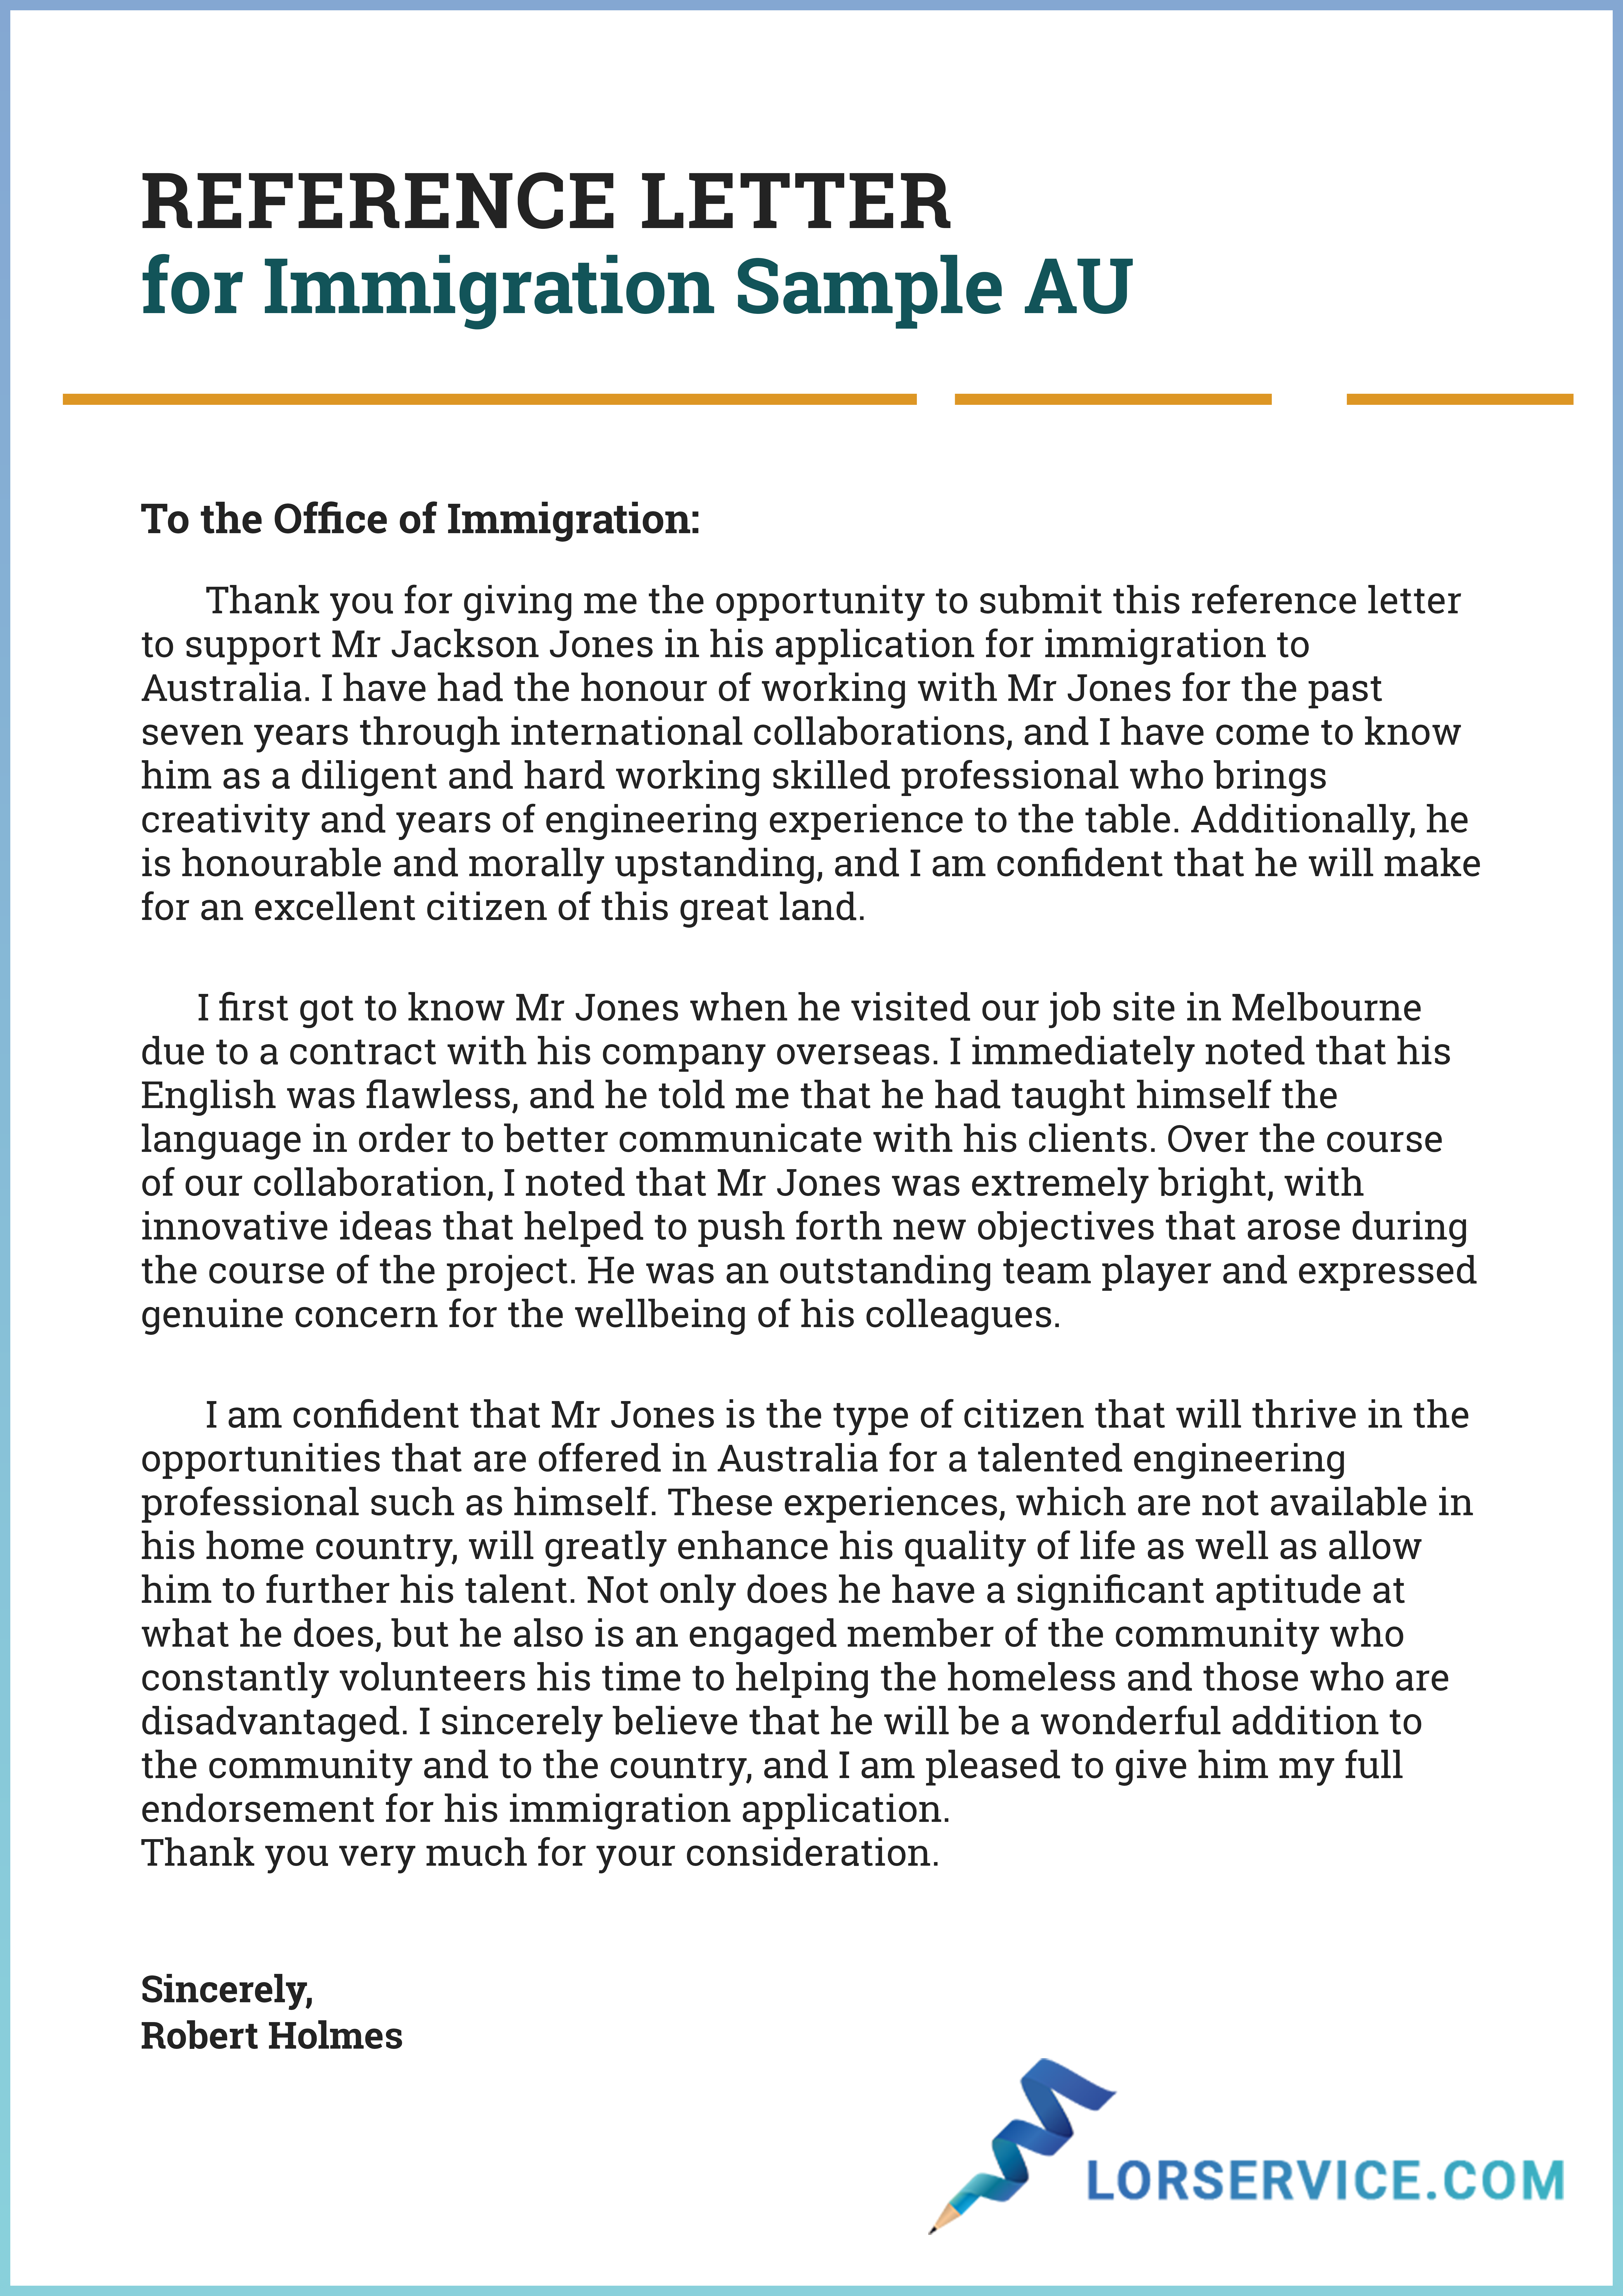 Immigration Letter Of Support Template from www.lorservice.com